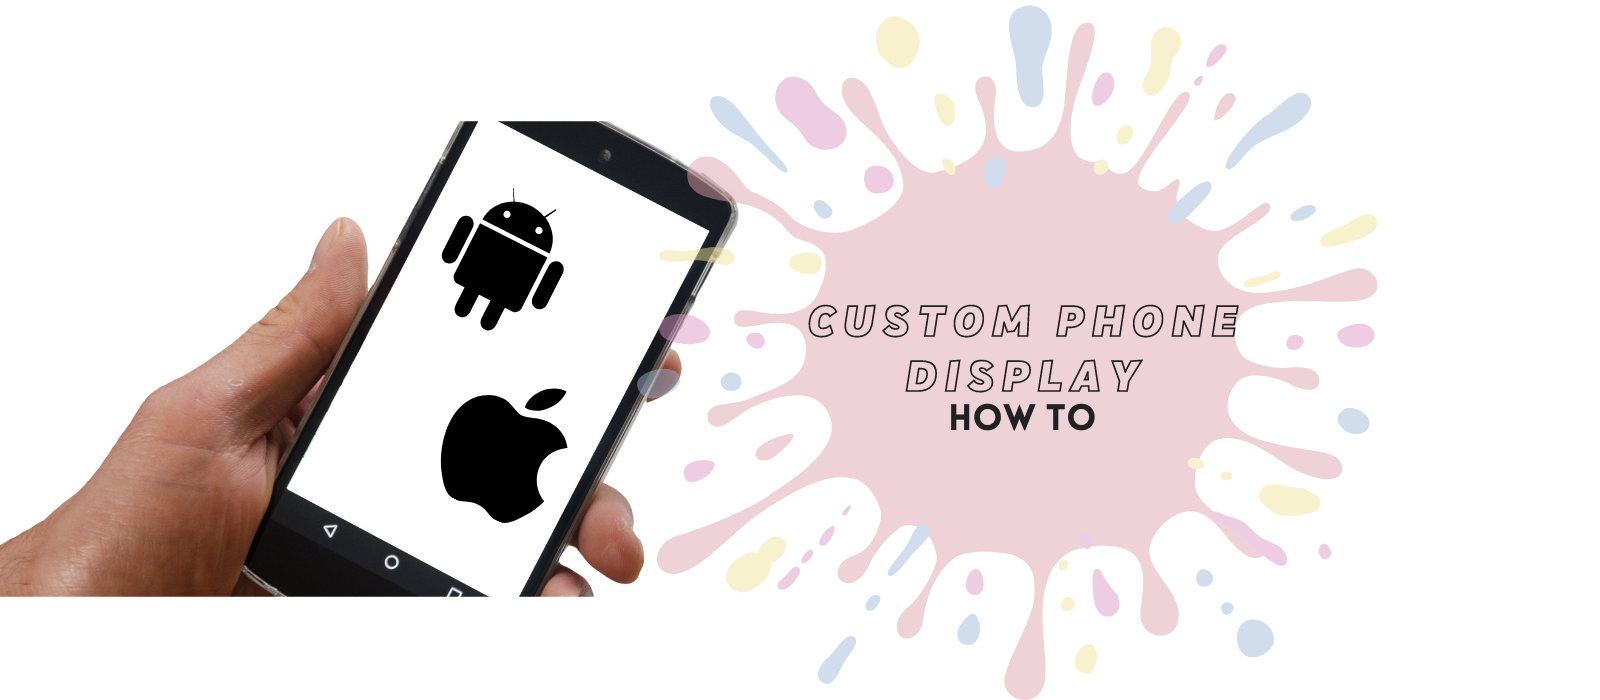 Customise Your Phone Display